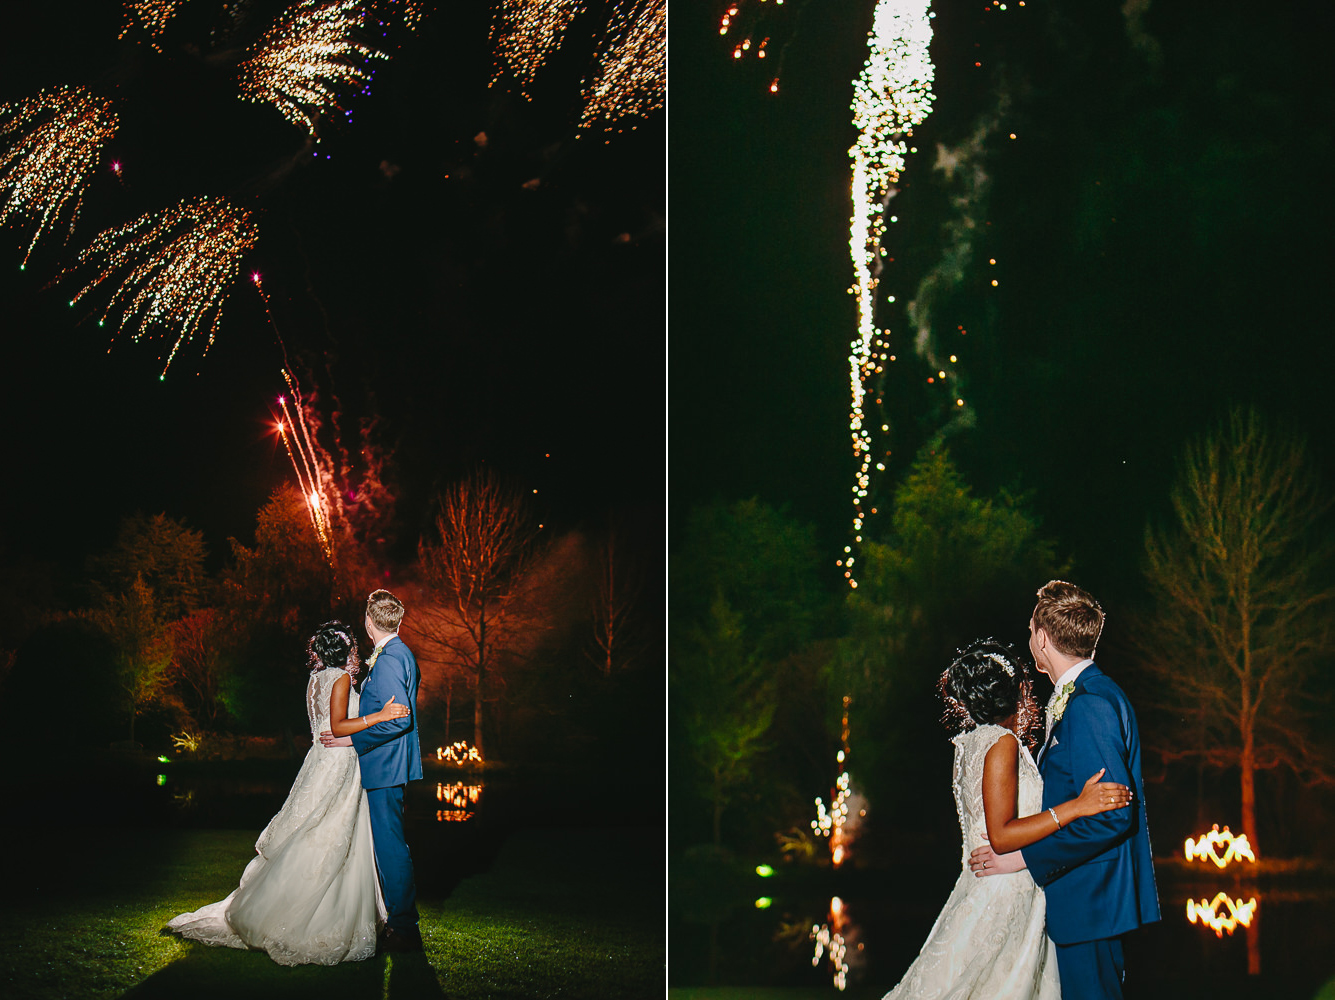 Wedding couple looking standing in front of fireworks